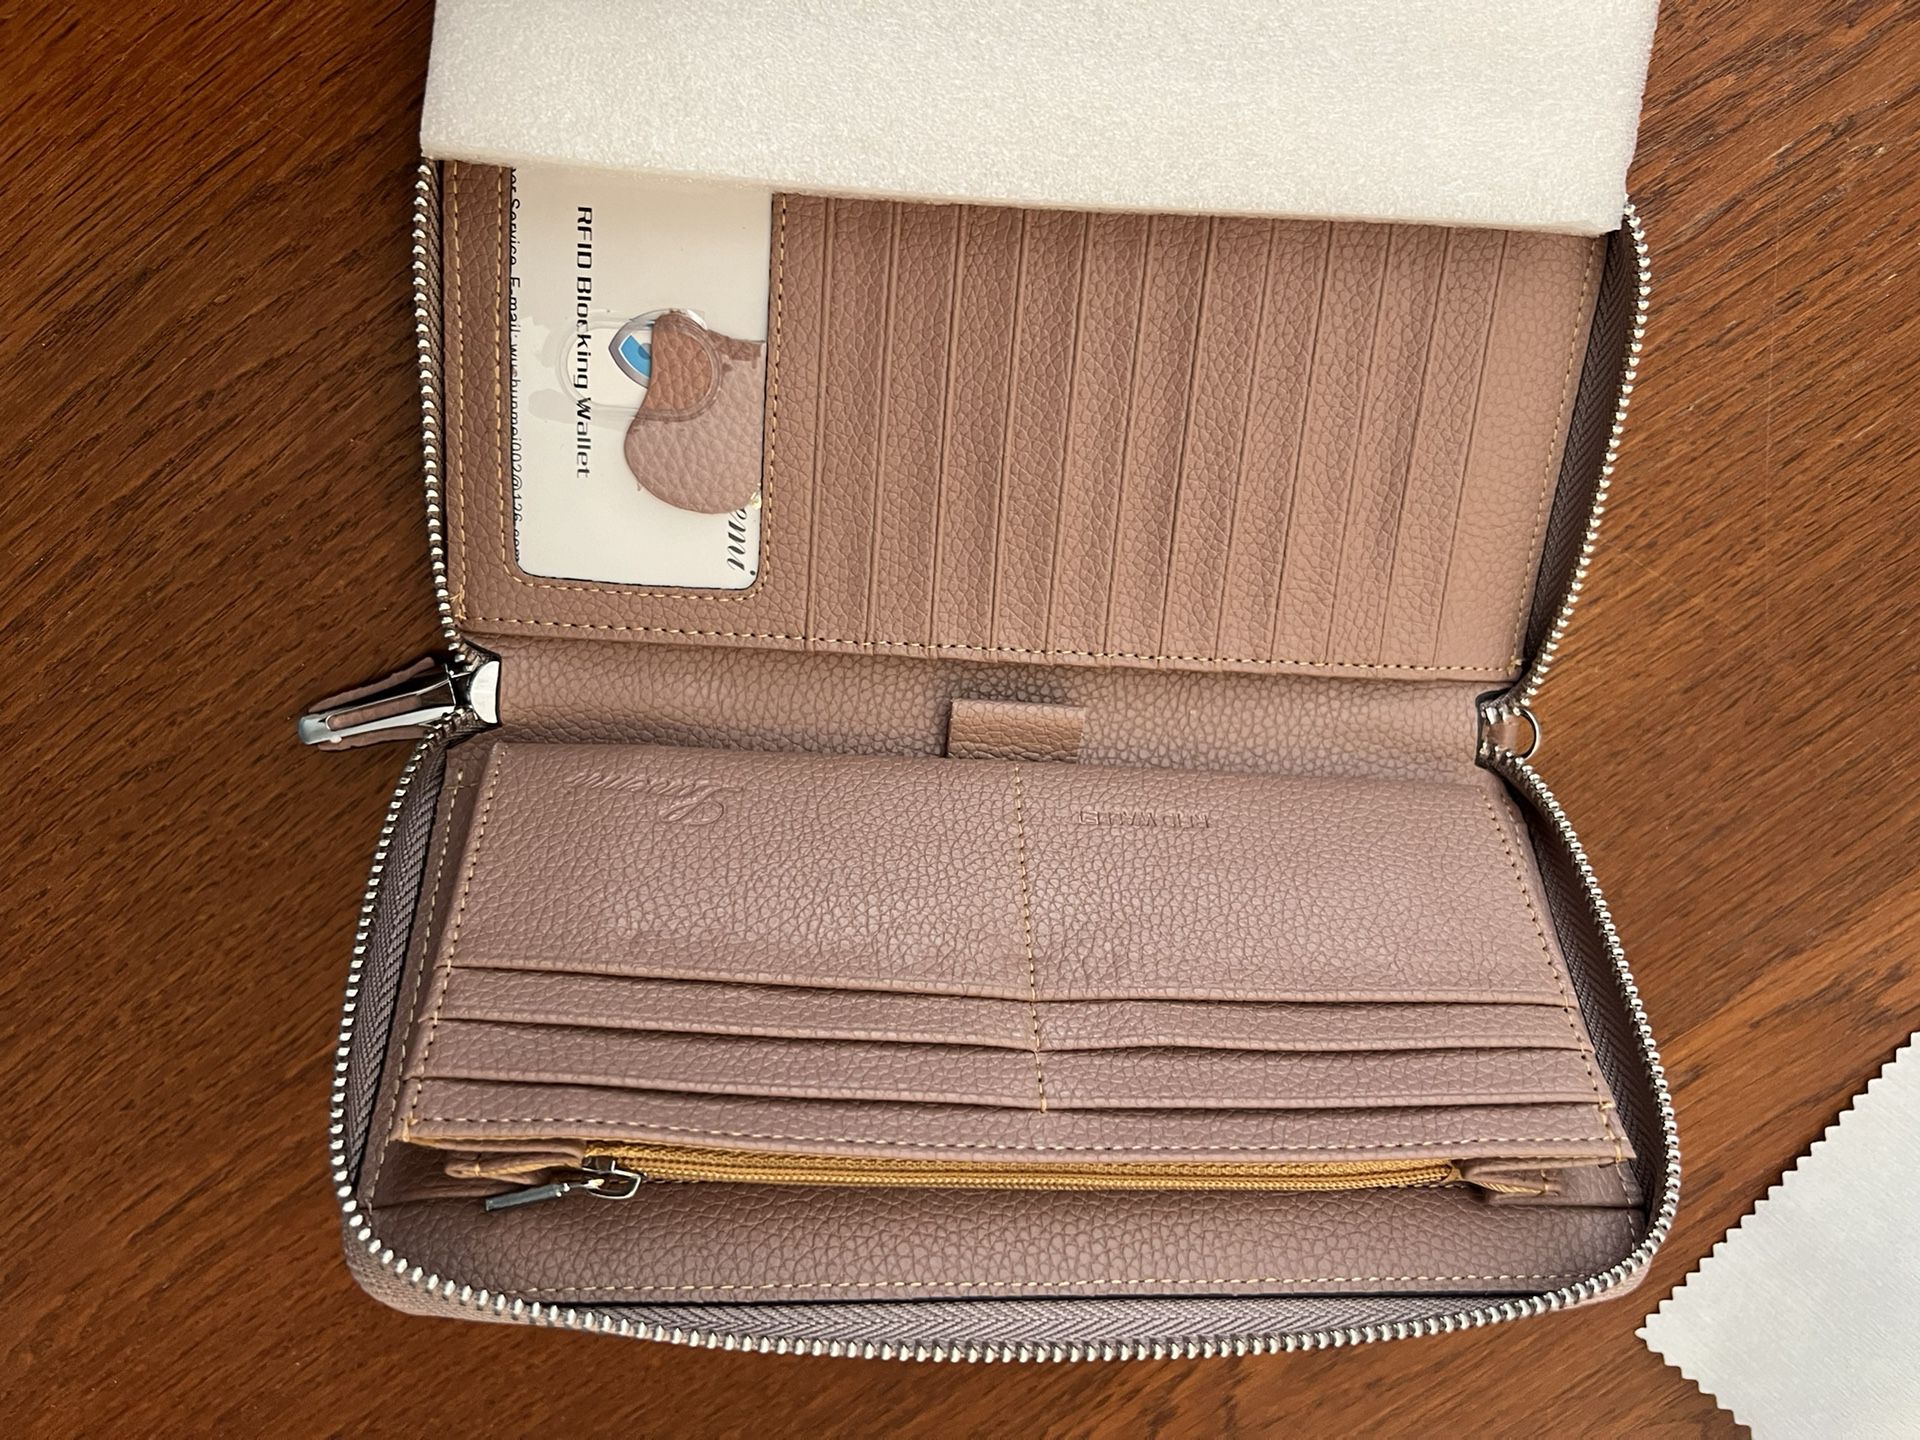 Lavemi Woman’s Leather Wallet (New In Box)